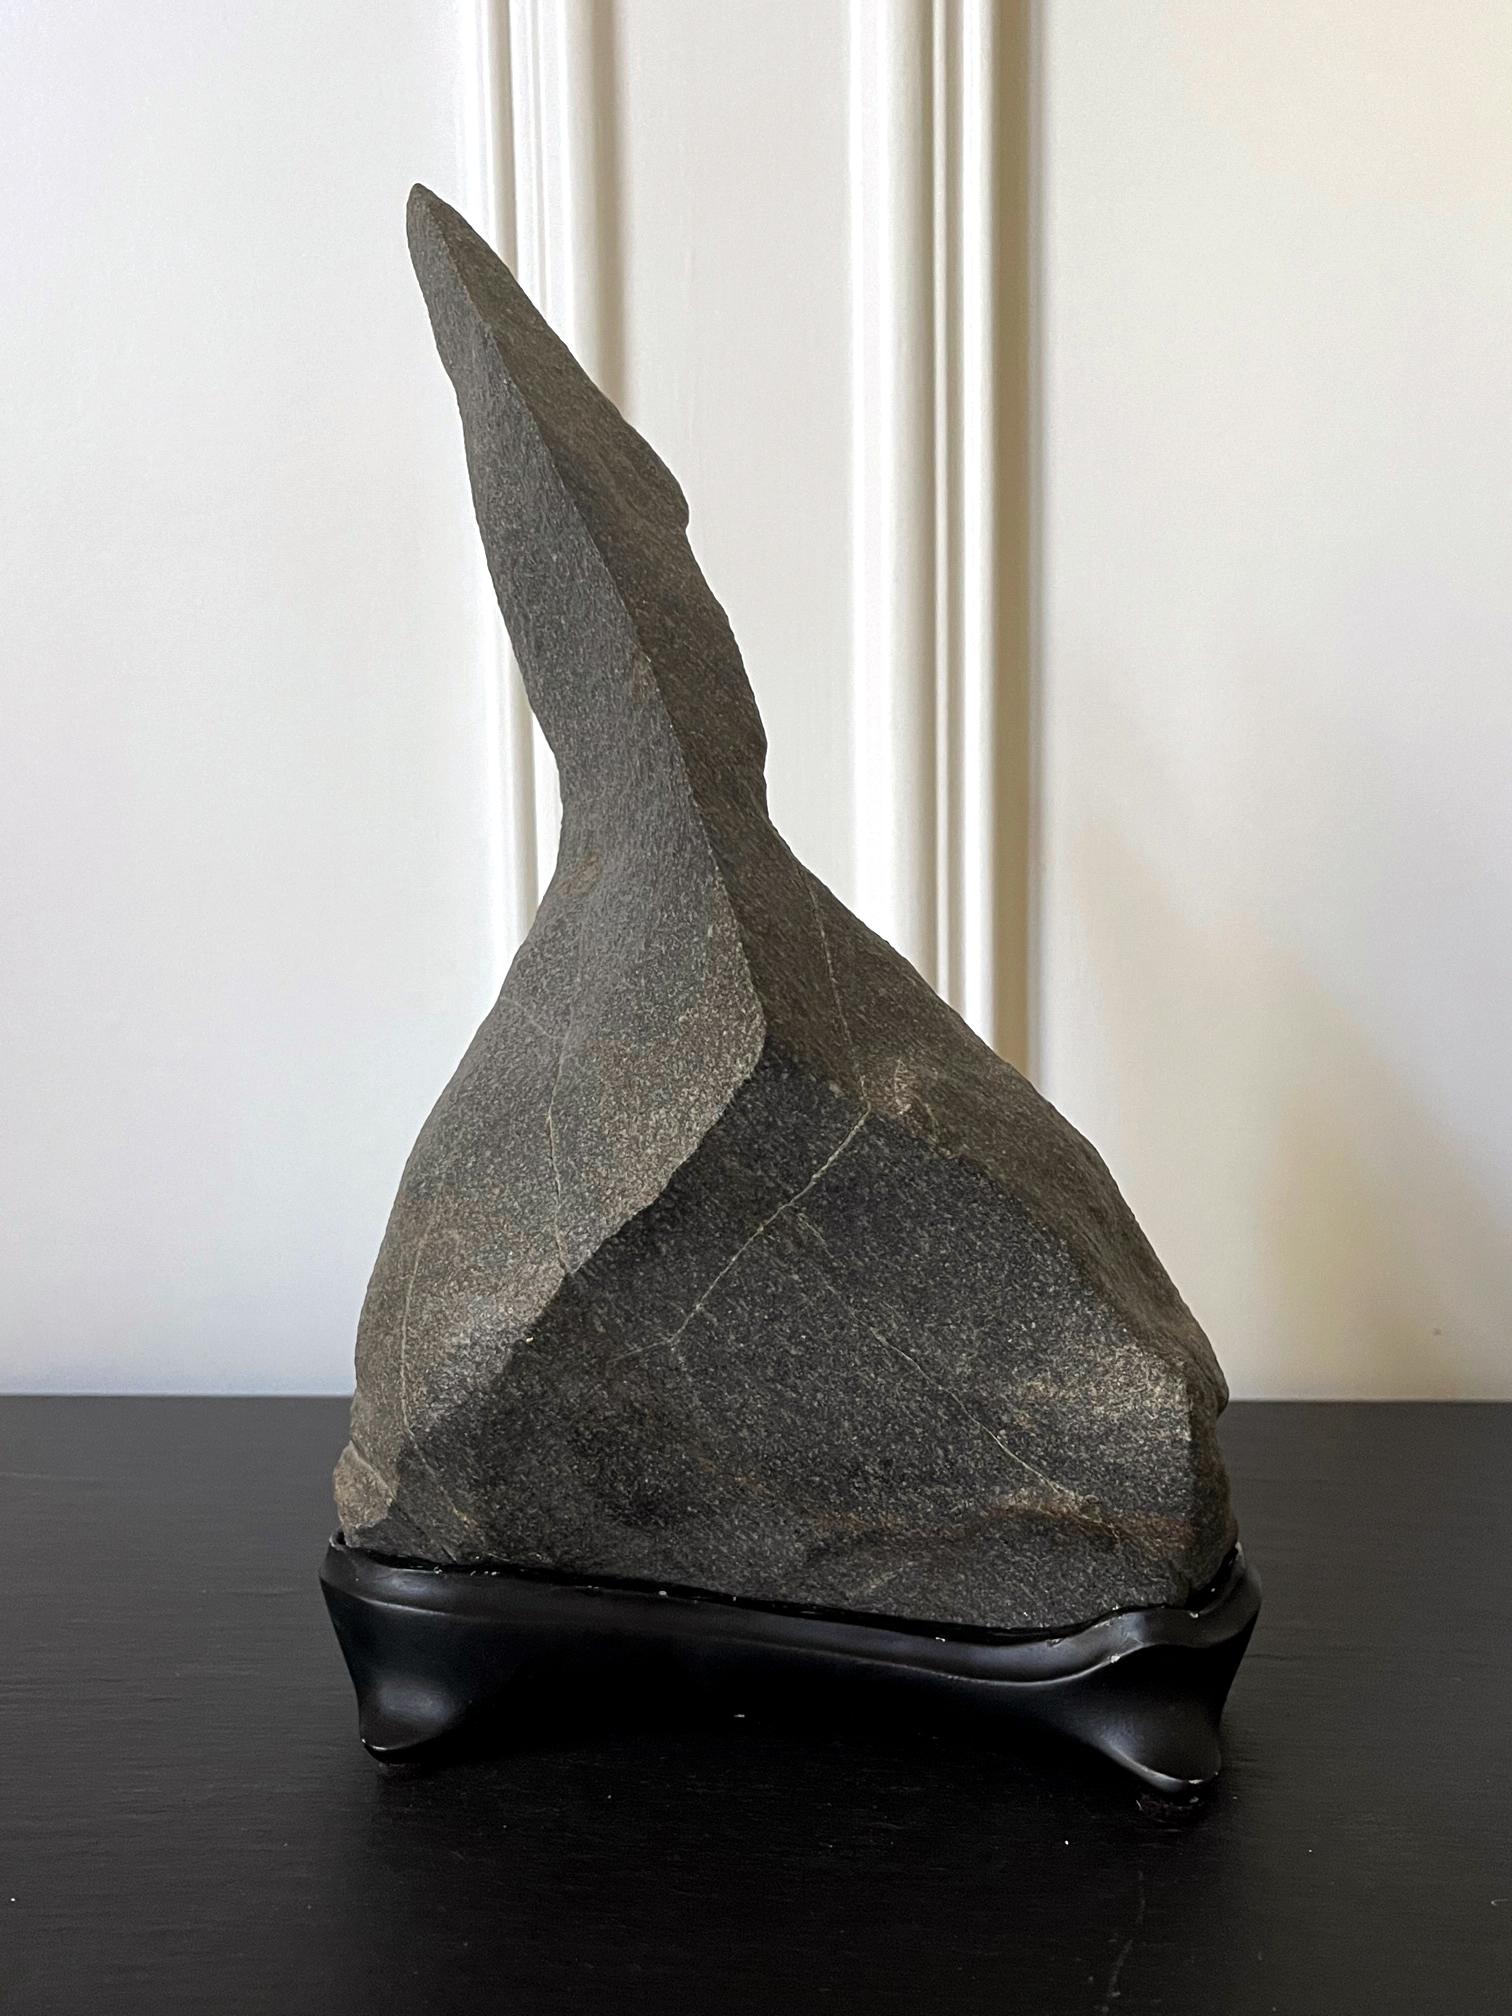 On offer is a highly abstract scholar rock on a fitted wood stand collected by an American collector in Palm Desert, CA. The dense rock in dark grey is likely granite and takes a natural sculptural form of a bird, which explains the note on the back